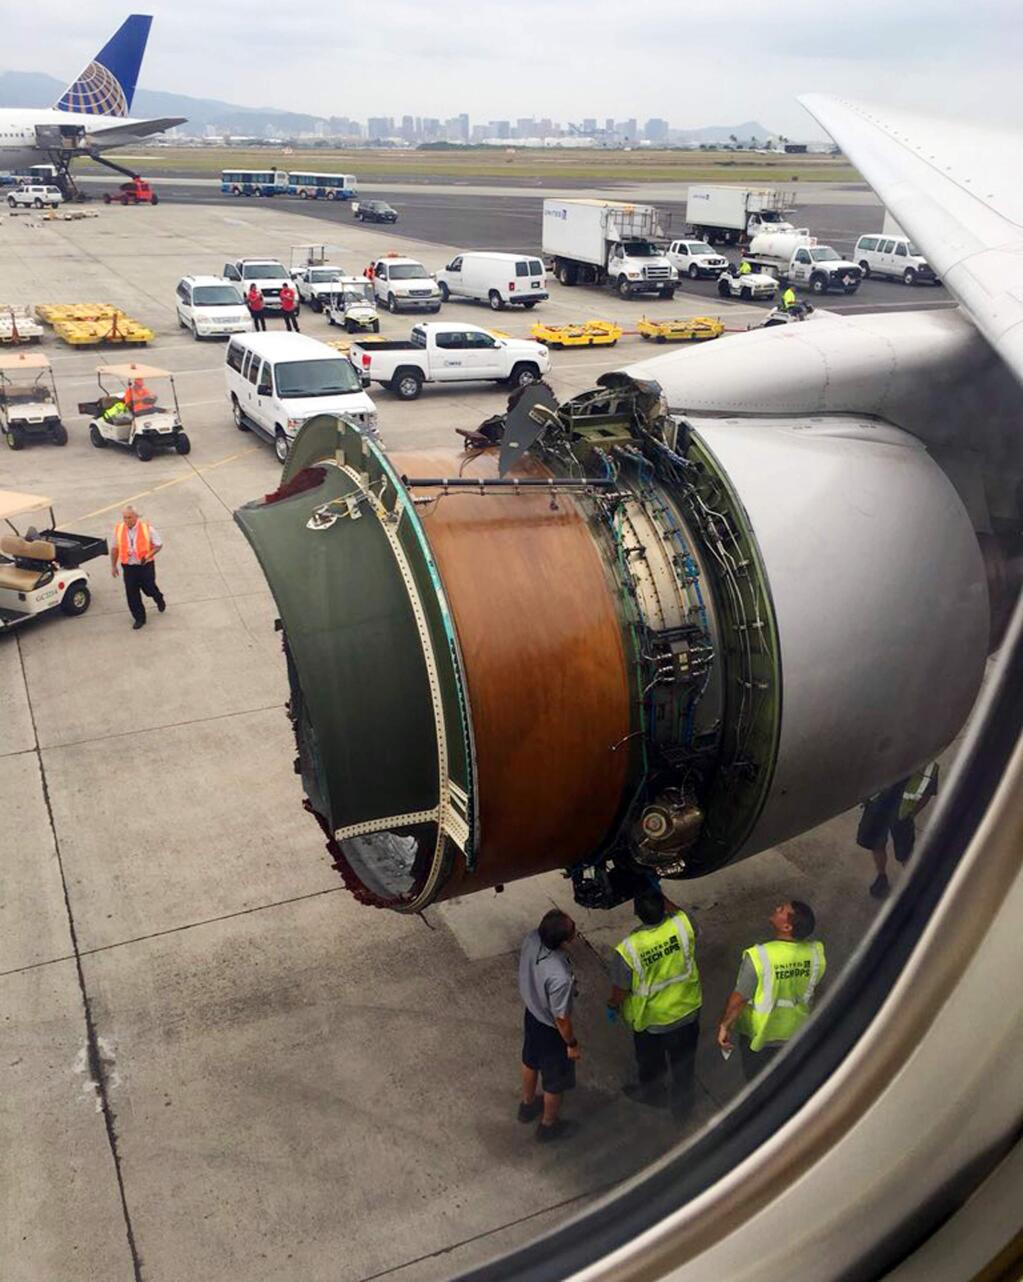 This photo provided by passenger Haley Ebert shows damage to an engine on what the FAA says is a Boeing 777 after parts came off the jetliner during its flight from San Francisco to Honolulu Tuesday, Feb. 13, 2018. The plane landed safely as emergency responders waited nearby. United Airlines spokeswoman Natalie Noonan says Flight 1175 made an emergency landing due to a mechanical issue. (Haley Ebert via AP)